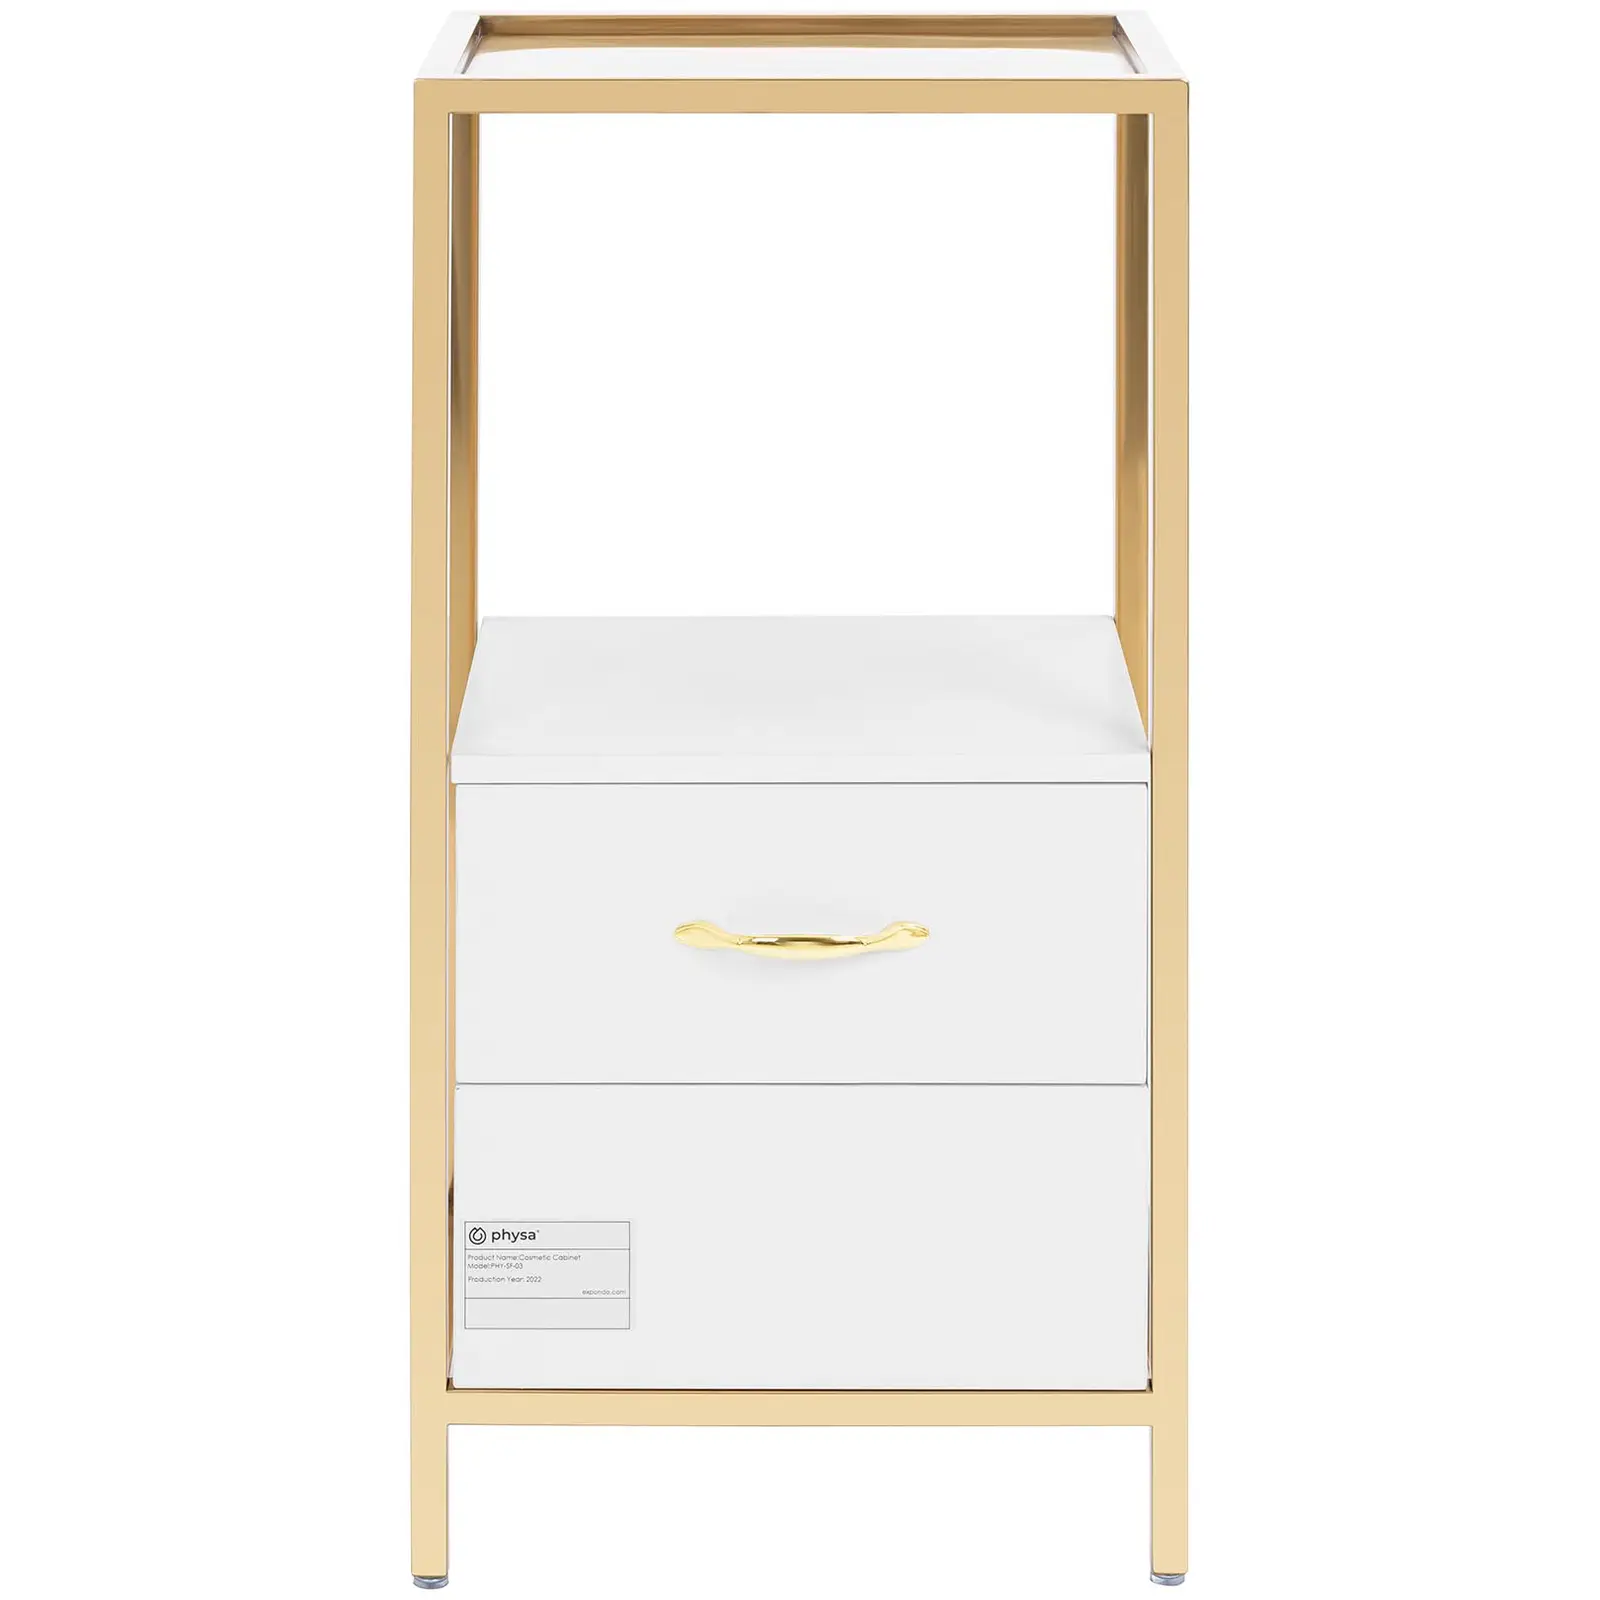 Beauty Cabinet - 40 x 30 x 80 cm - 2 drawers - gold / white